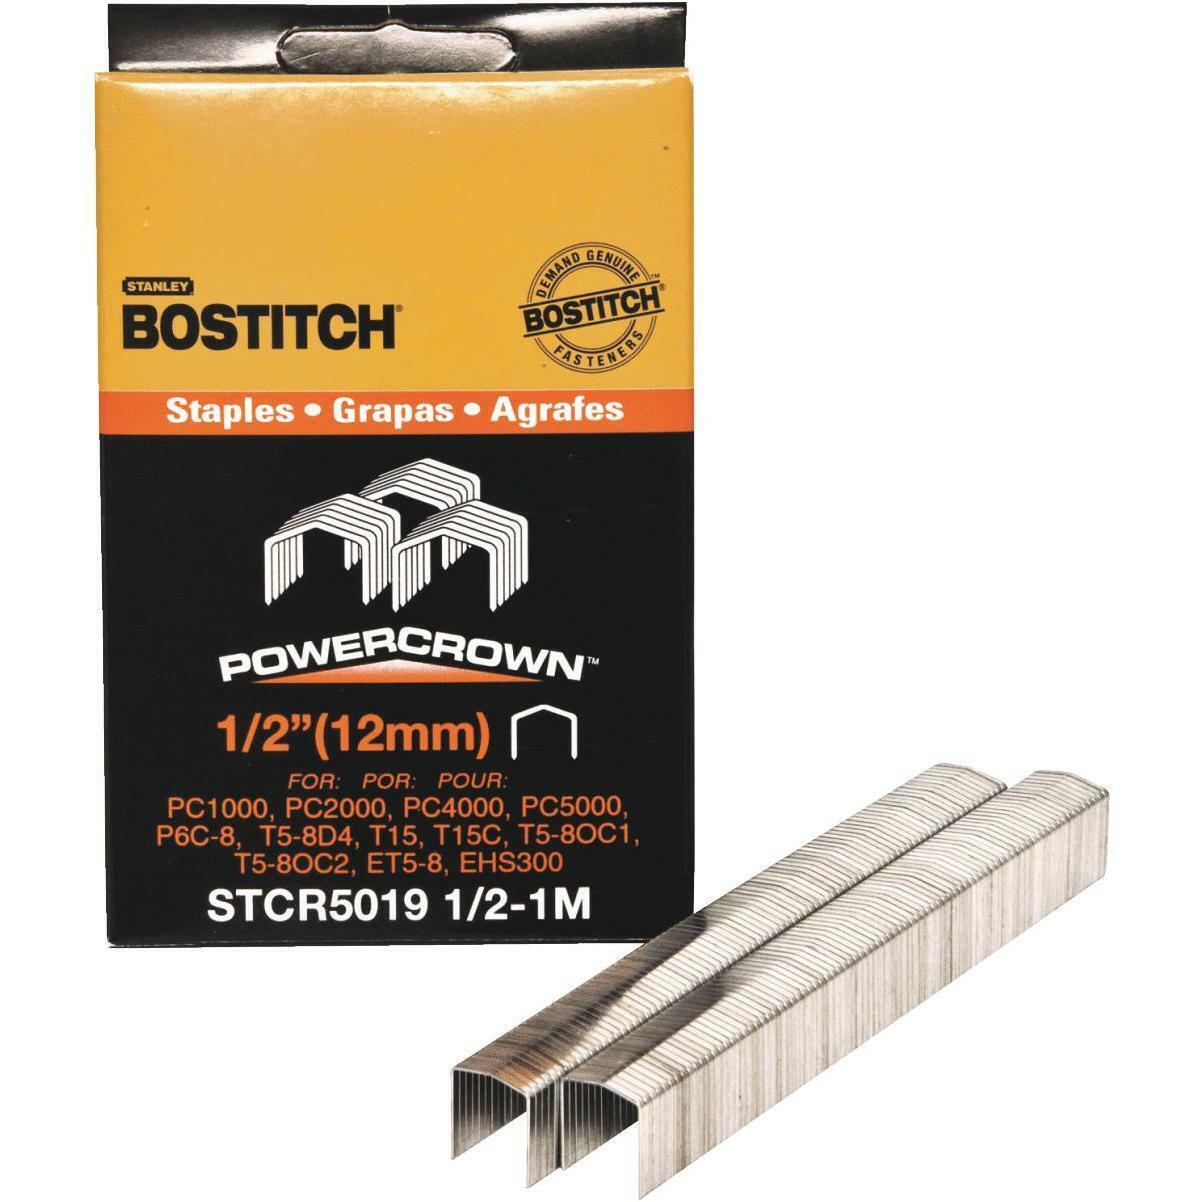 Bostitch Powercrown Tacker Staples 1/2'' (1000-pack) STCR5019 1/2-1M